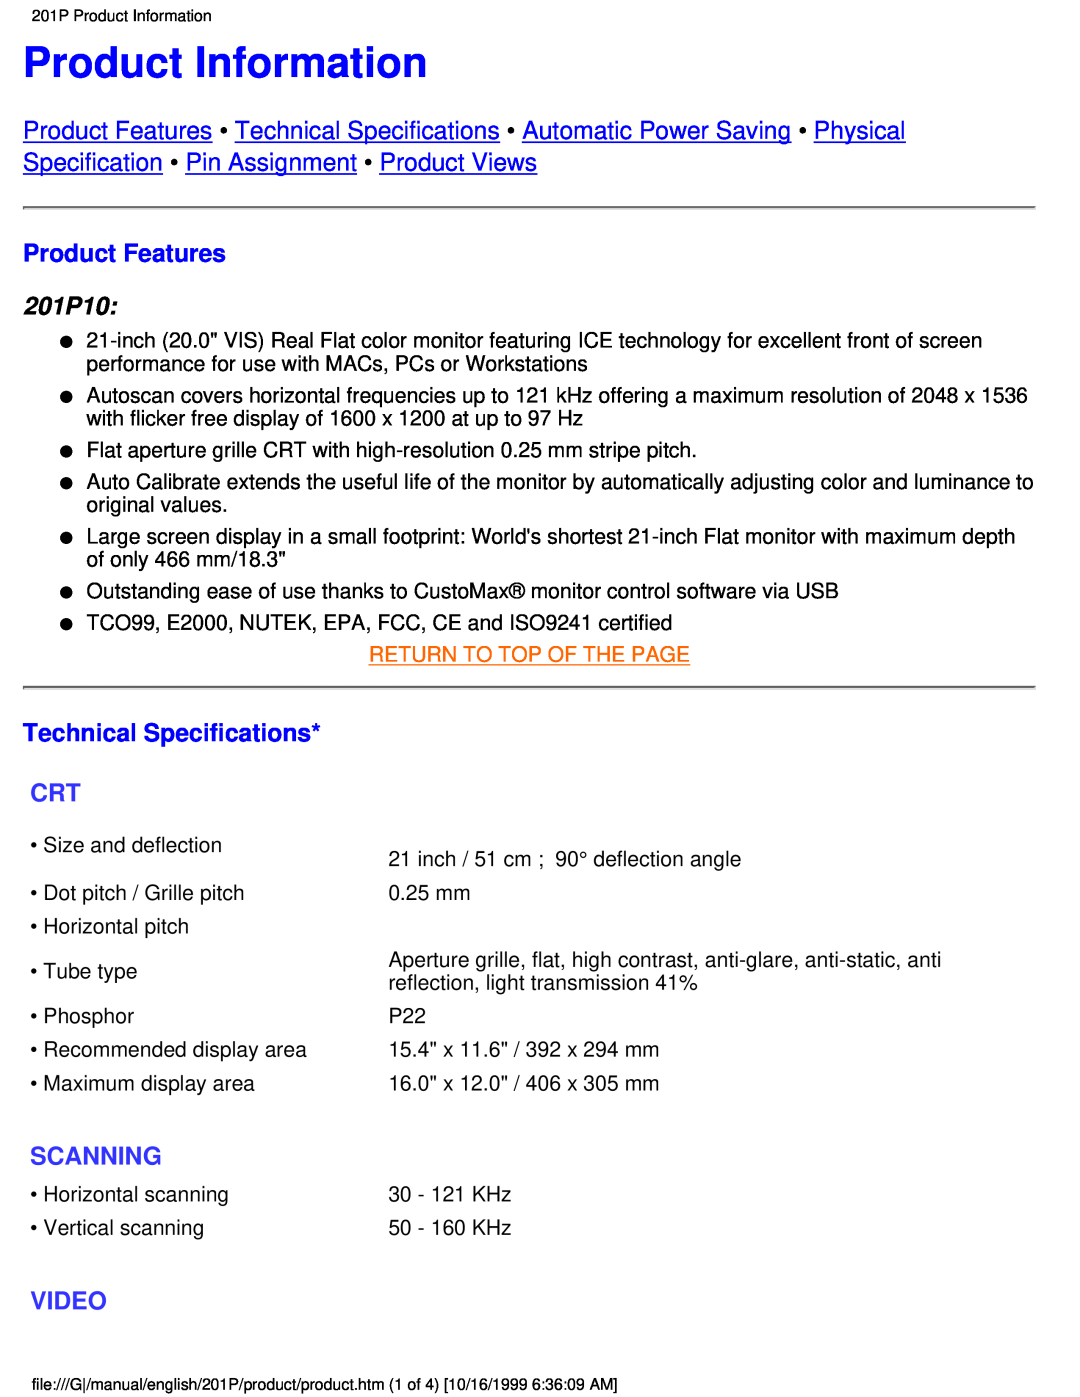 Philips user manual Product Information, Product Features, 201P10, Technical Specifications, Scanning, Video 